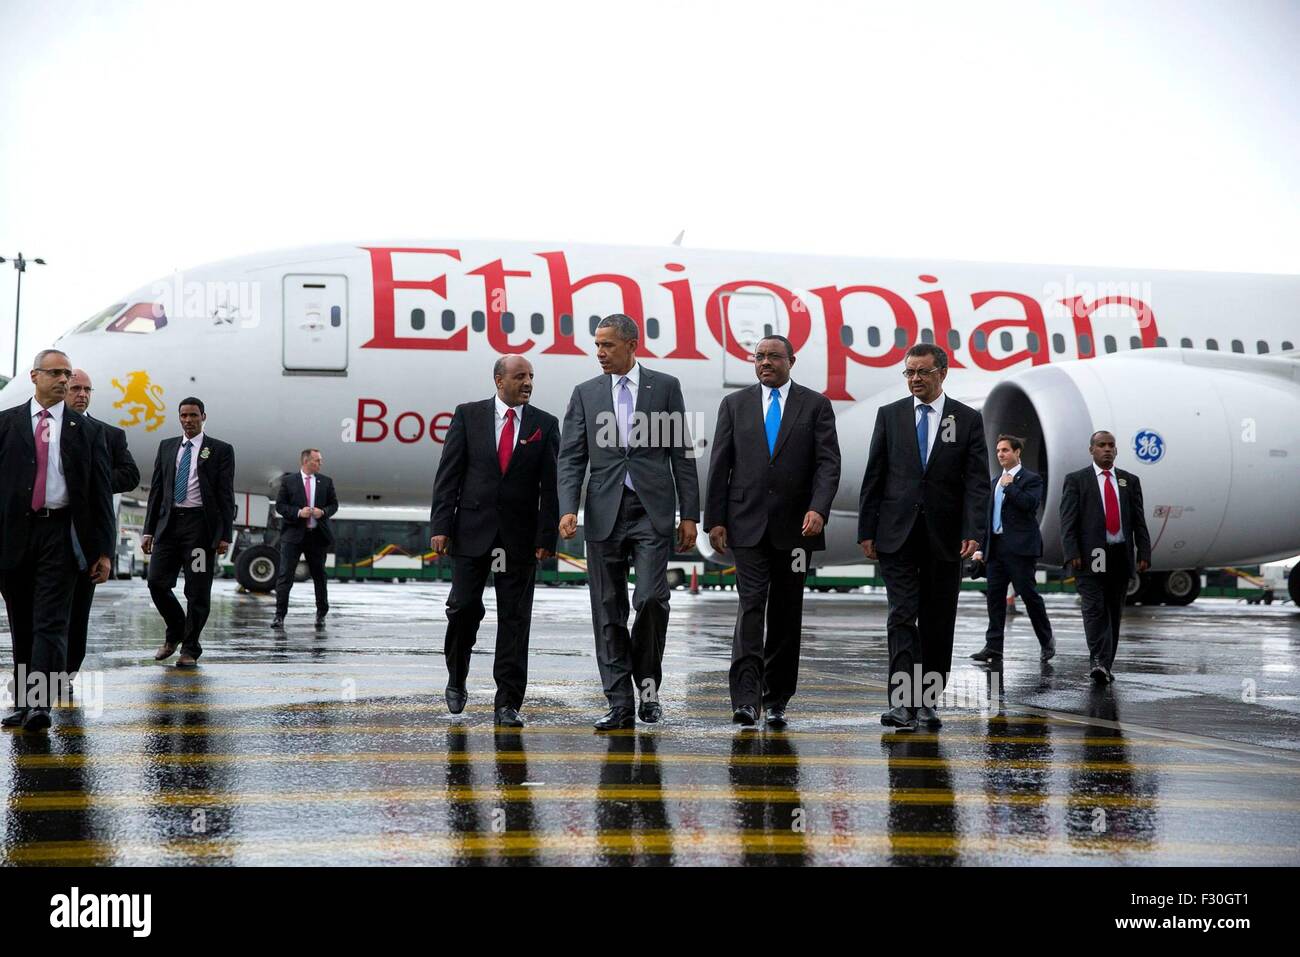 U.S. President Barack Obama walks with Ethiopian Prime Minister Hailemariam Desalegn Boshe (center) and President Mulatu Teshome (right) after viewing an Ethiopian Airlines Boeing 787 Dreamliner at Bole International Airport July 27, 2015 in Addis Ababa, Ethiopia. Stock Photo